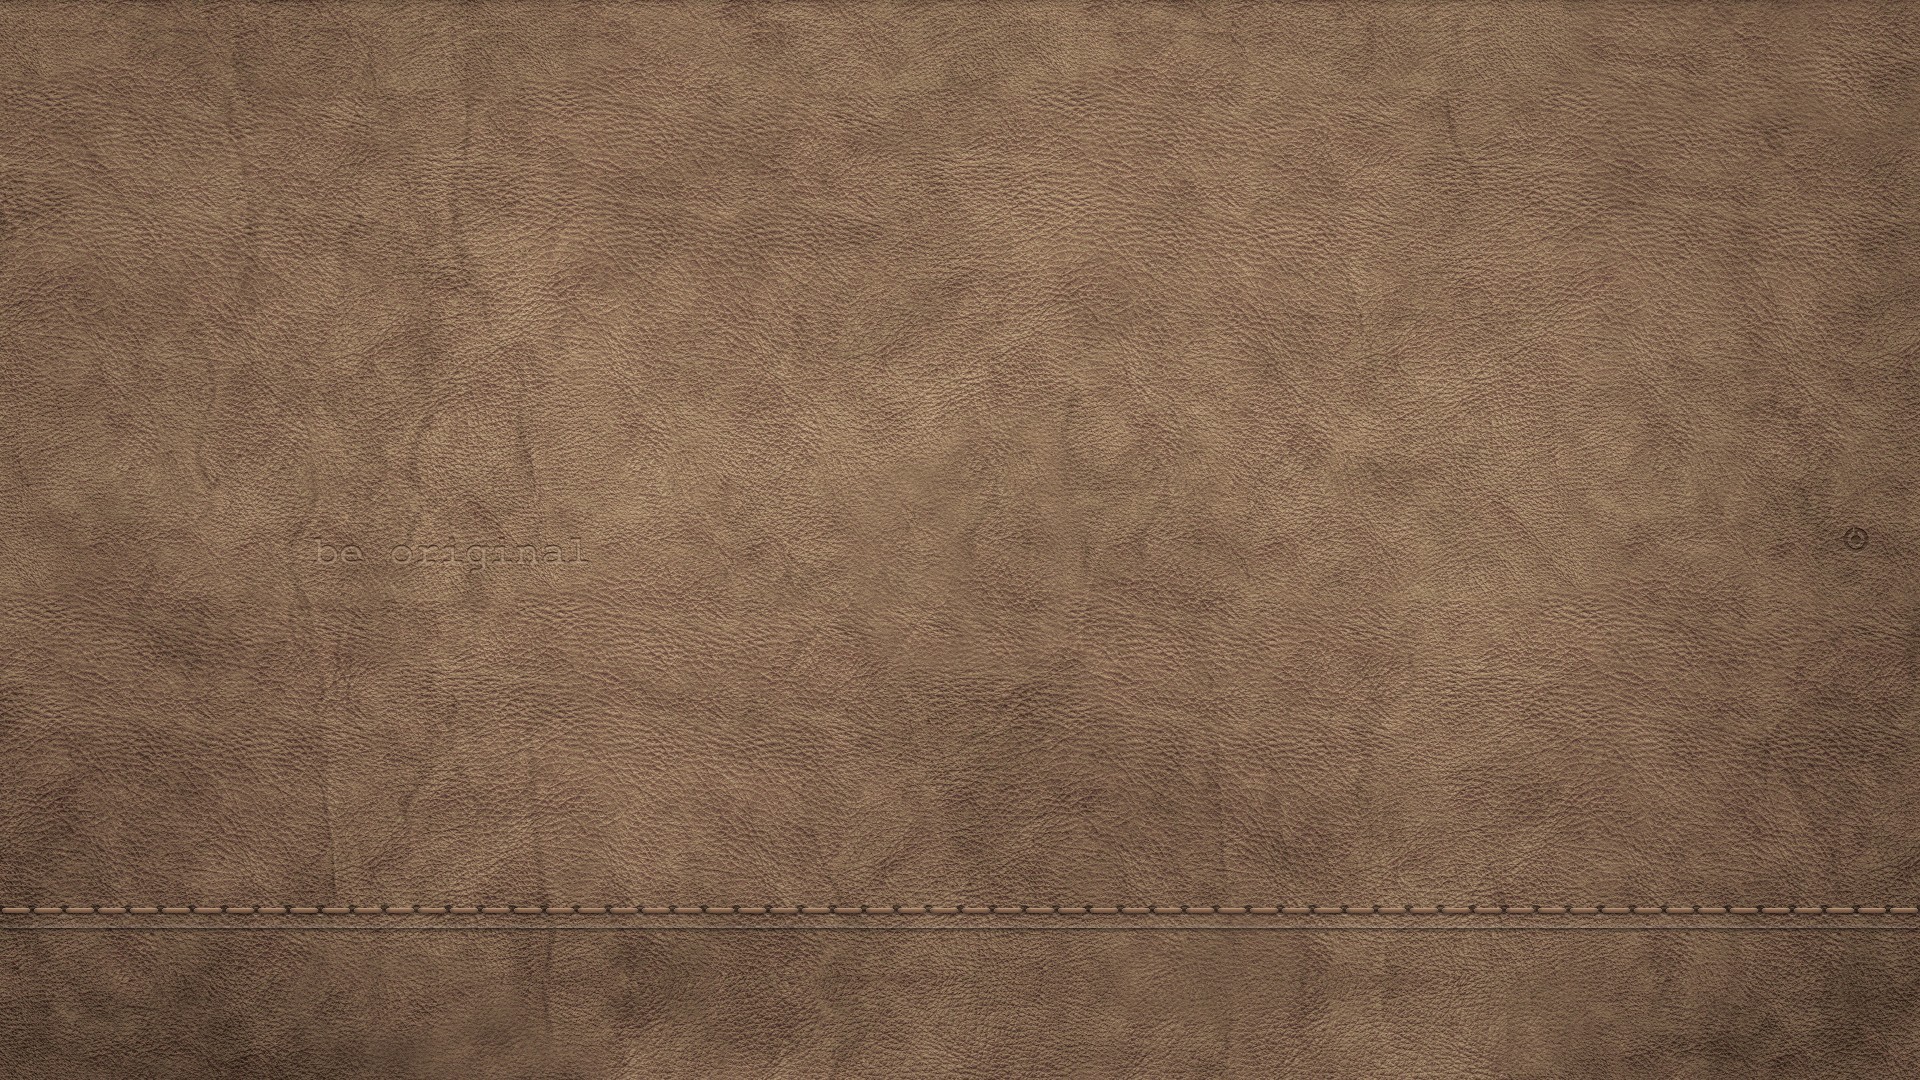 General 1920x1080 texture pattern leather